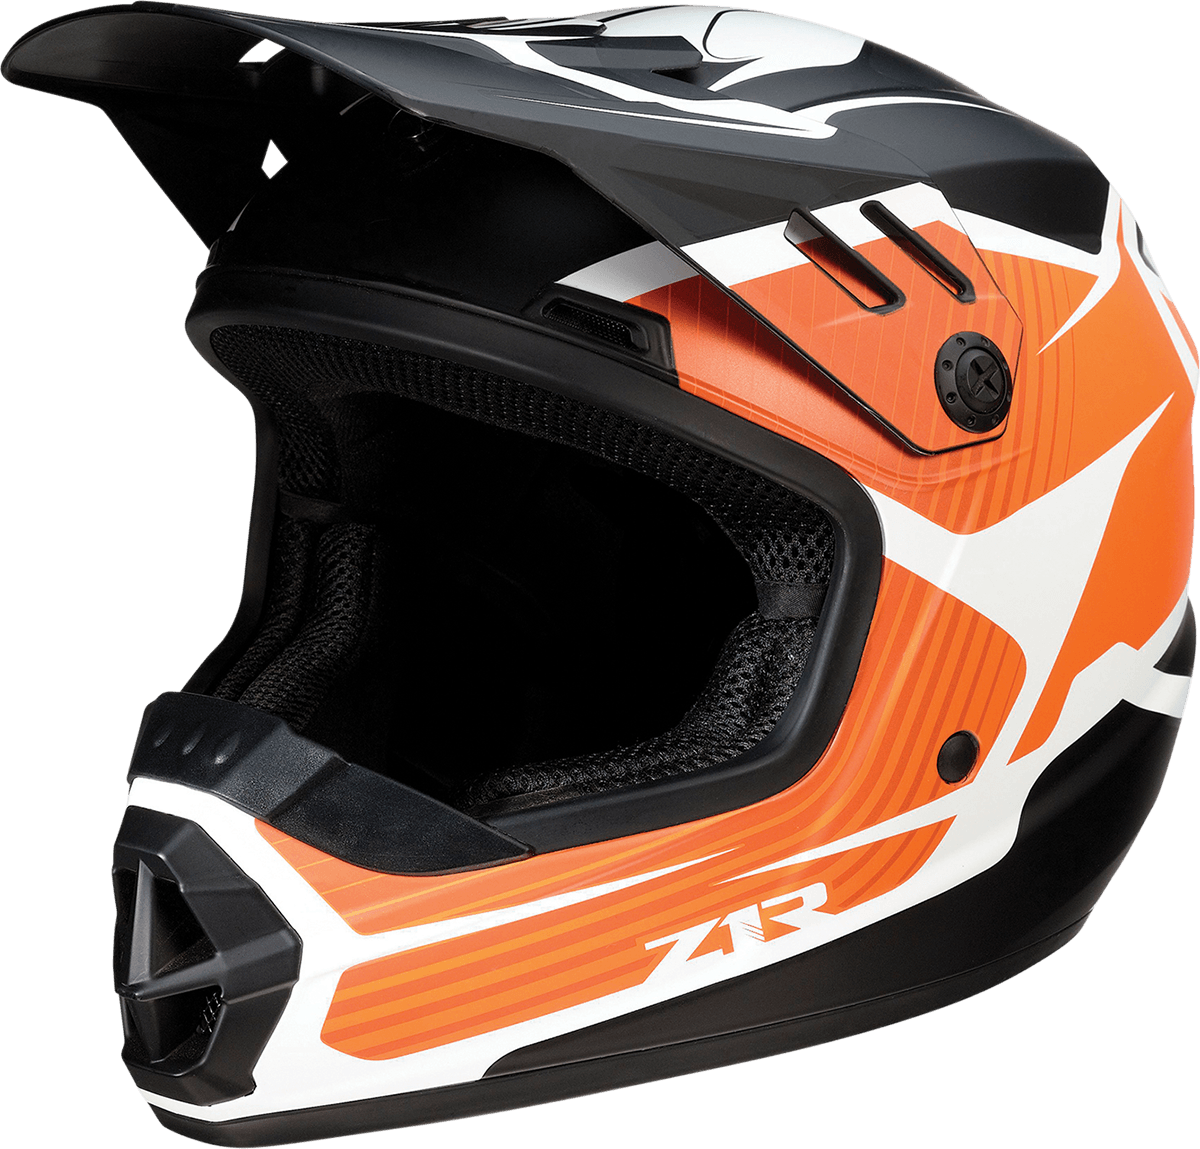 Z1R Youth Rise Helmet - Flame - Orange - Small 0111-1442